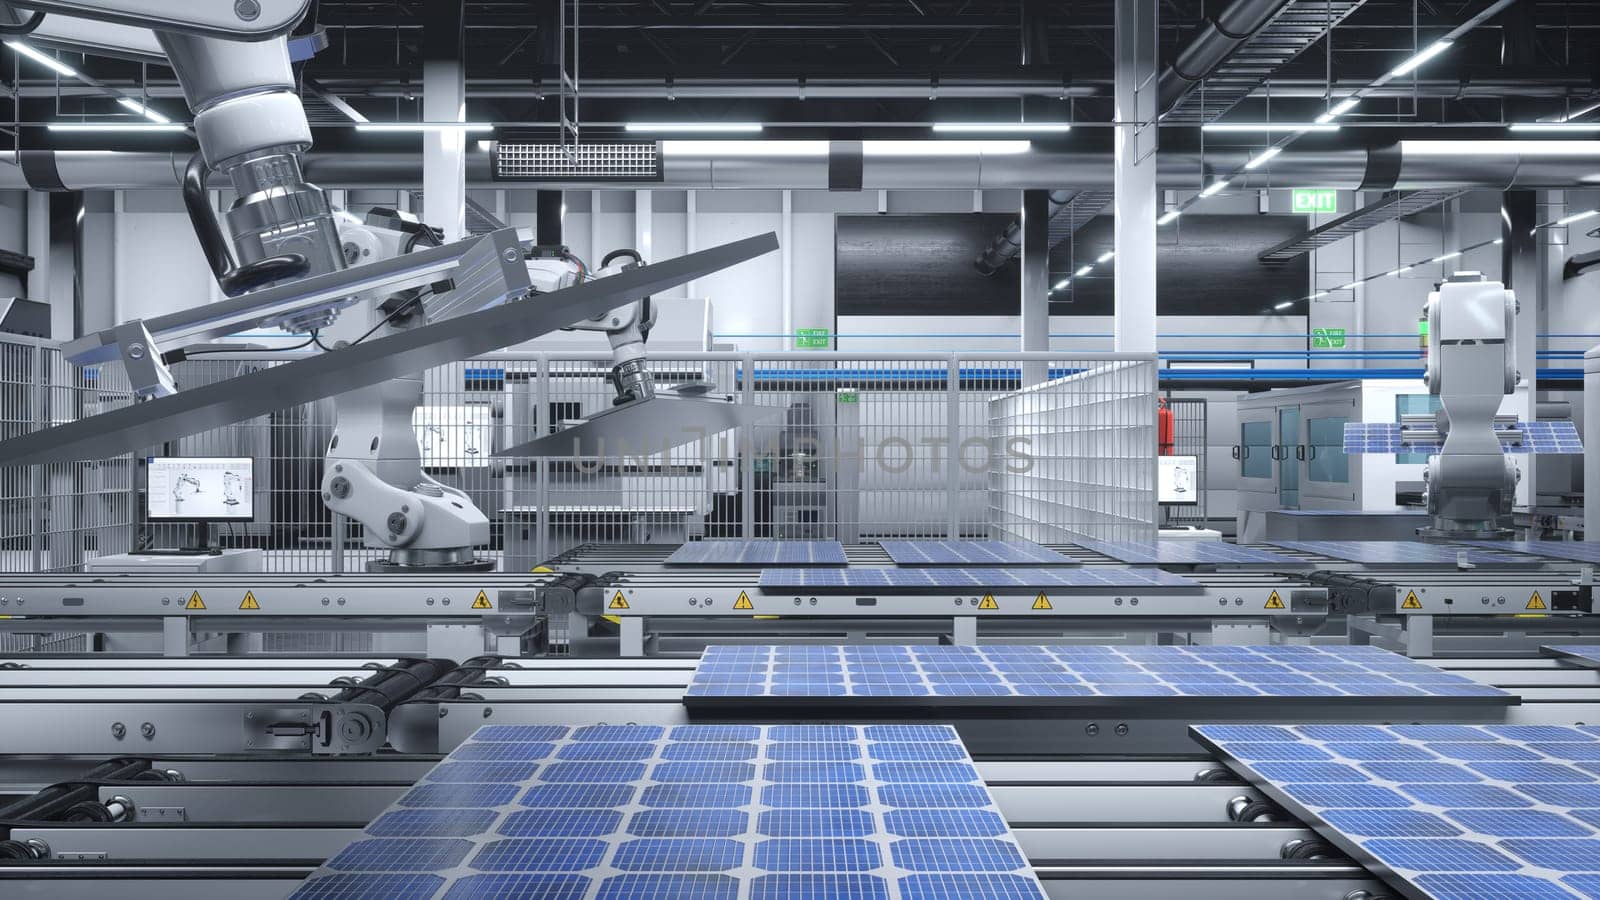 Photovoltaic cells being placed on assembly lines, 3D illustration by DCStudio